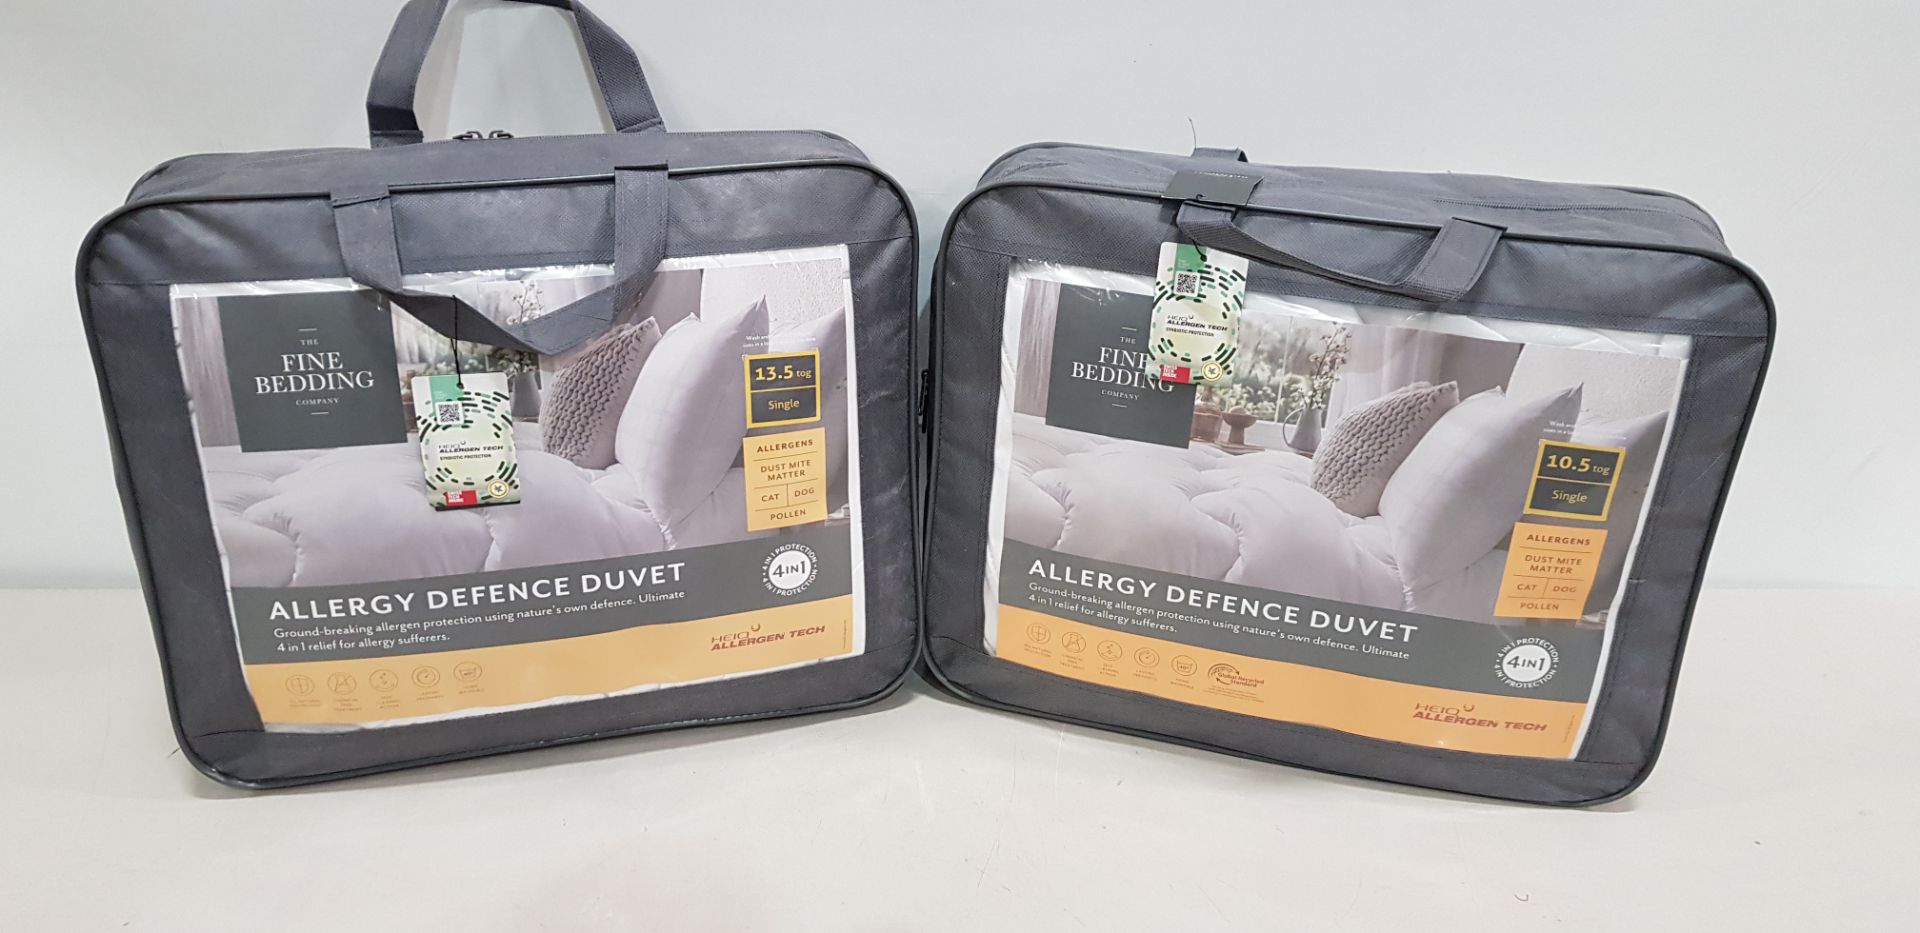 4 X BRAND NEW THE FINE BEDDING COMPANY ALLERGY DEFENCE DUVETS 2 SINGLE'S 13.5 TOG AND 2 SINGLE'S